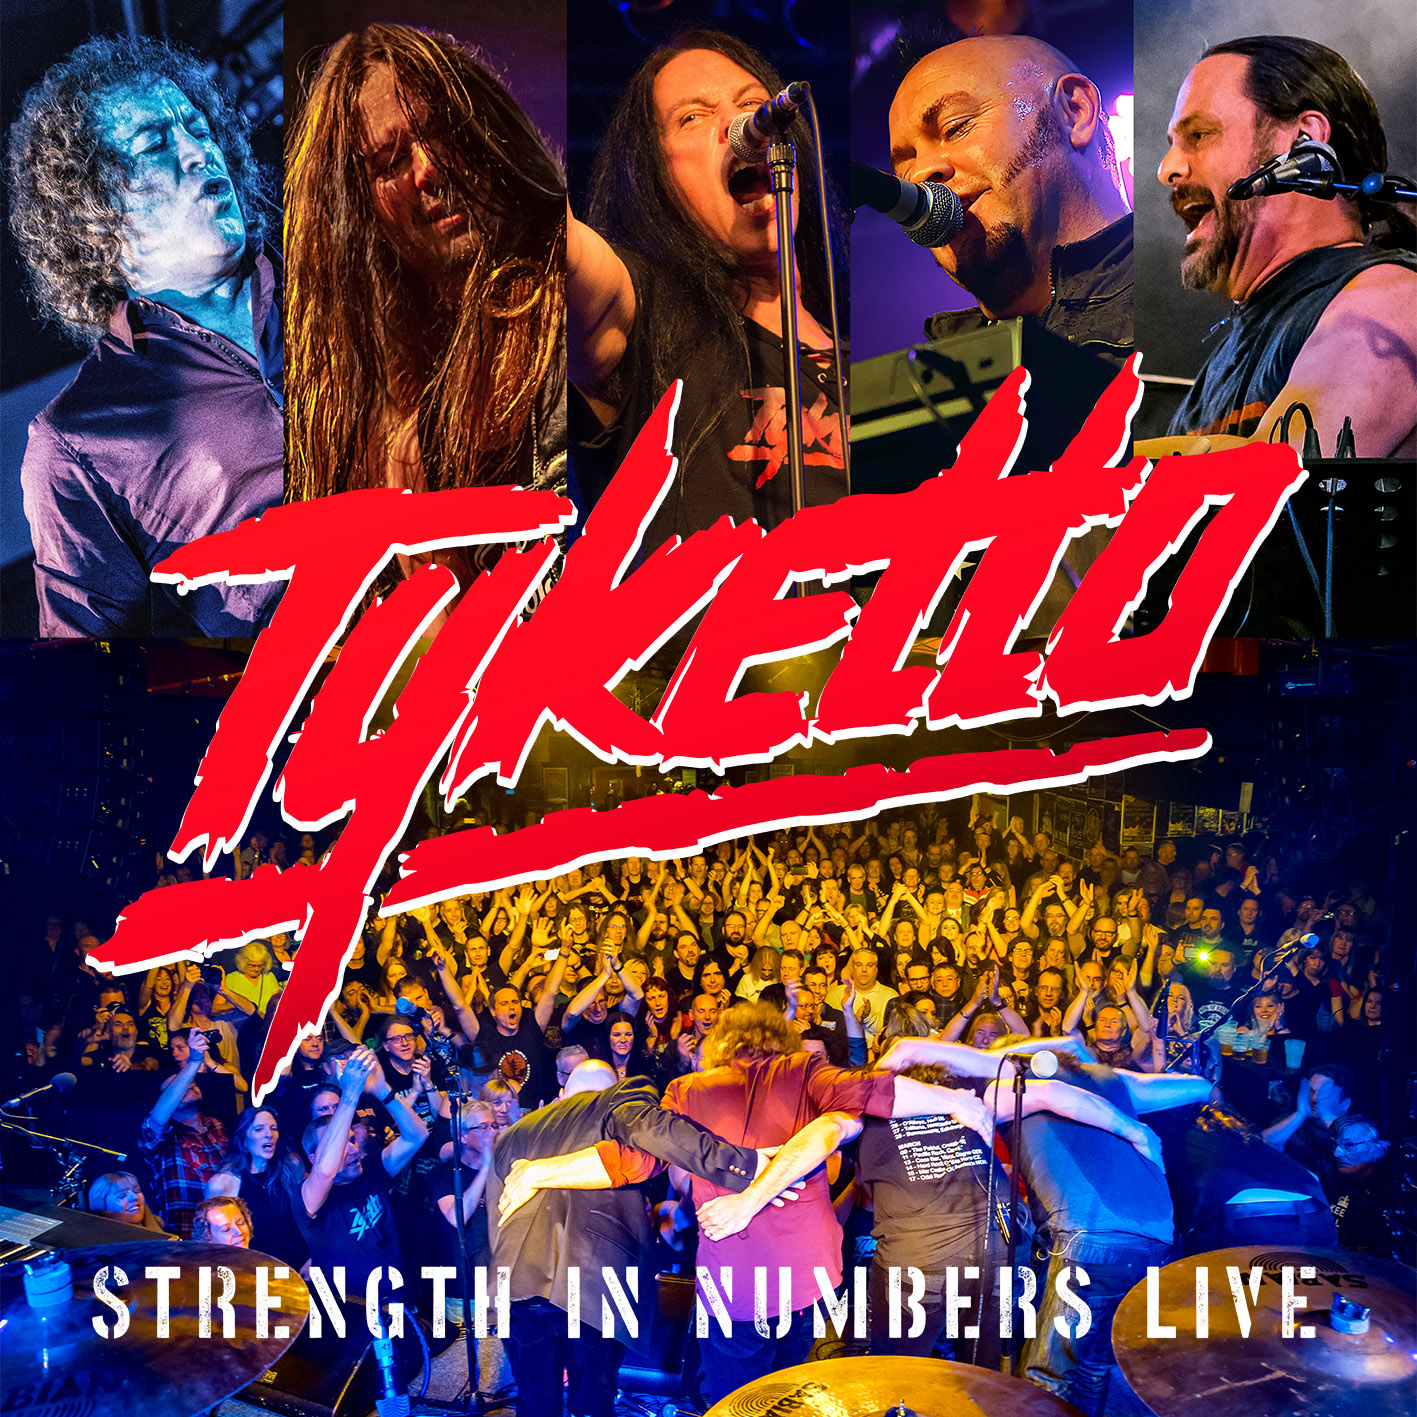 Tyketto - “Strength in Numbers Live”